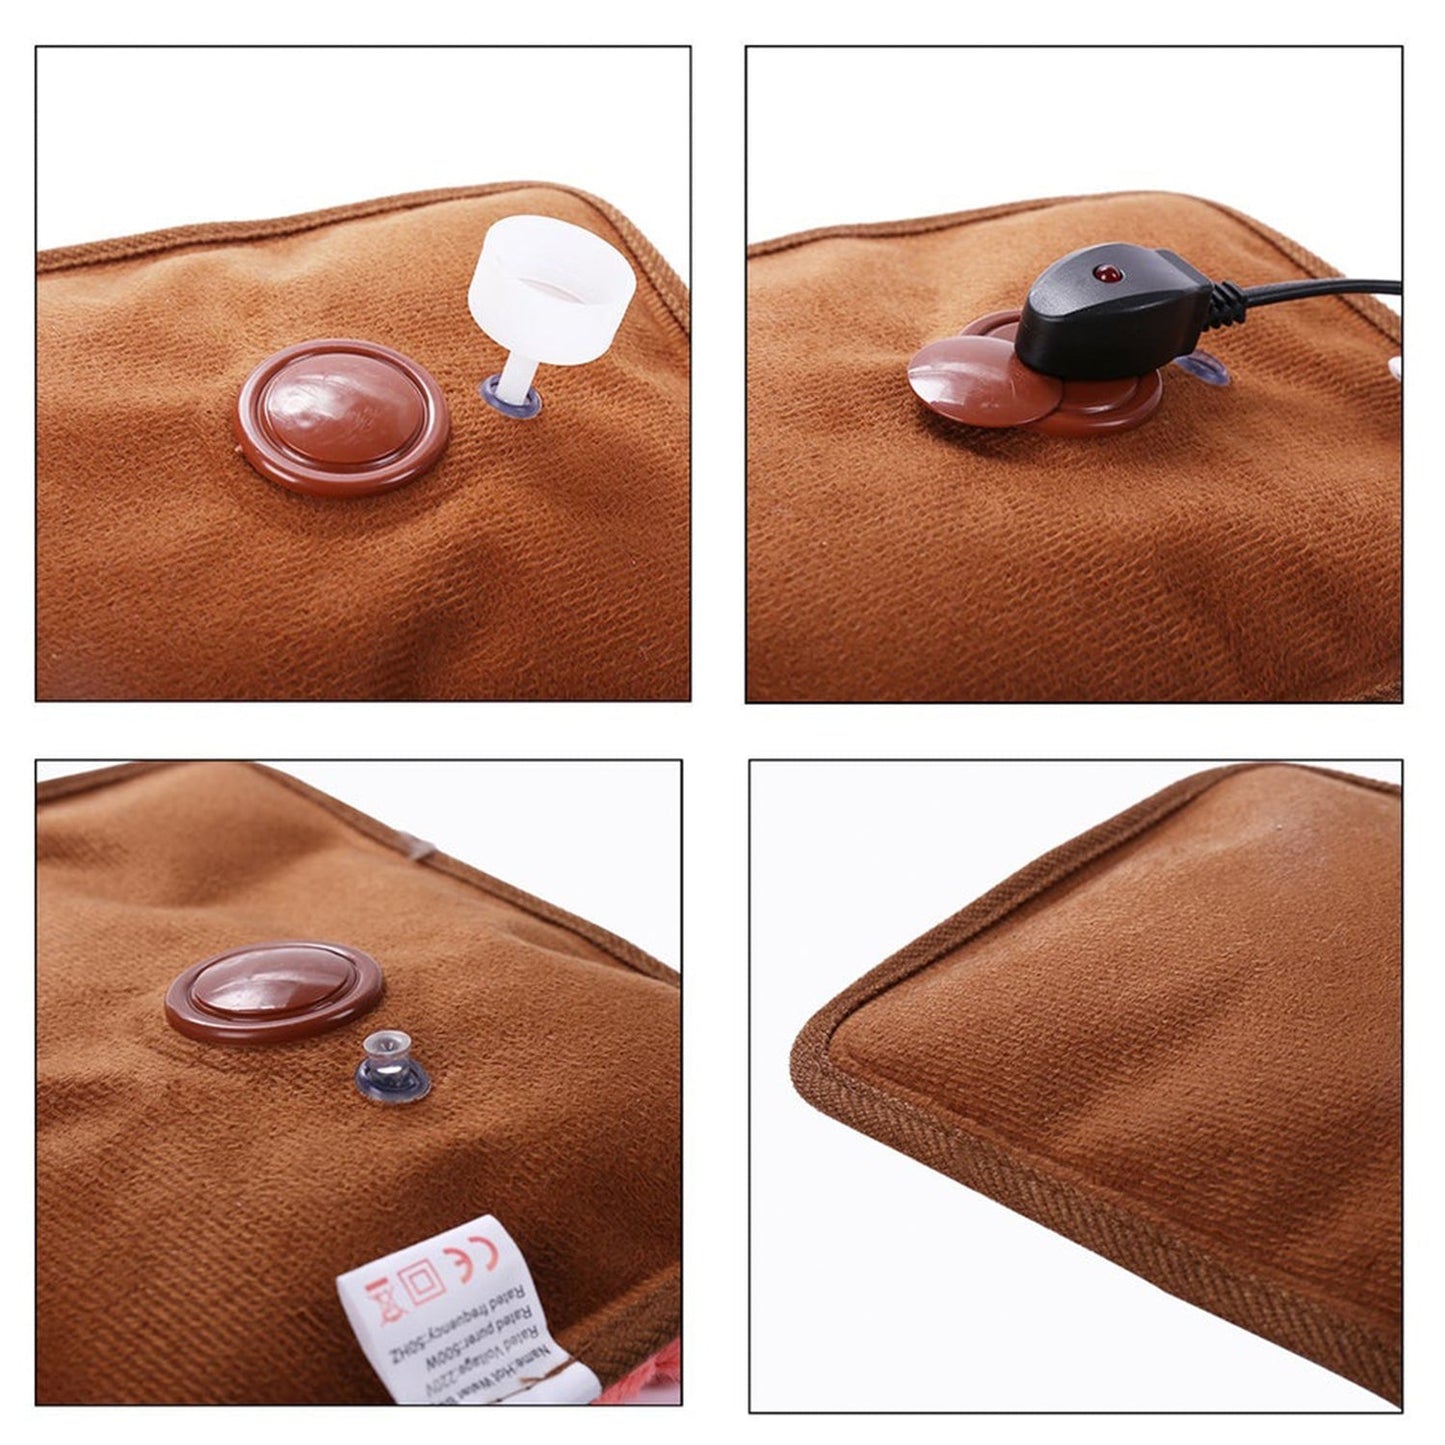 0381B Heating Bag and Heating Pad Used to Ease Pain in Joints, Muscles and Soft Tissues Etc. - SWASTIK CREATIONS The Trend Point SWASTIK CREATIONS The Trend Point